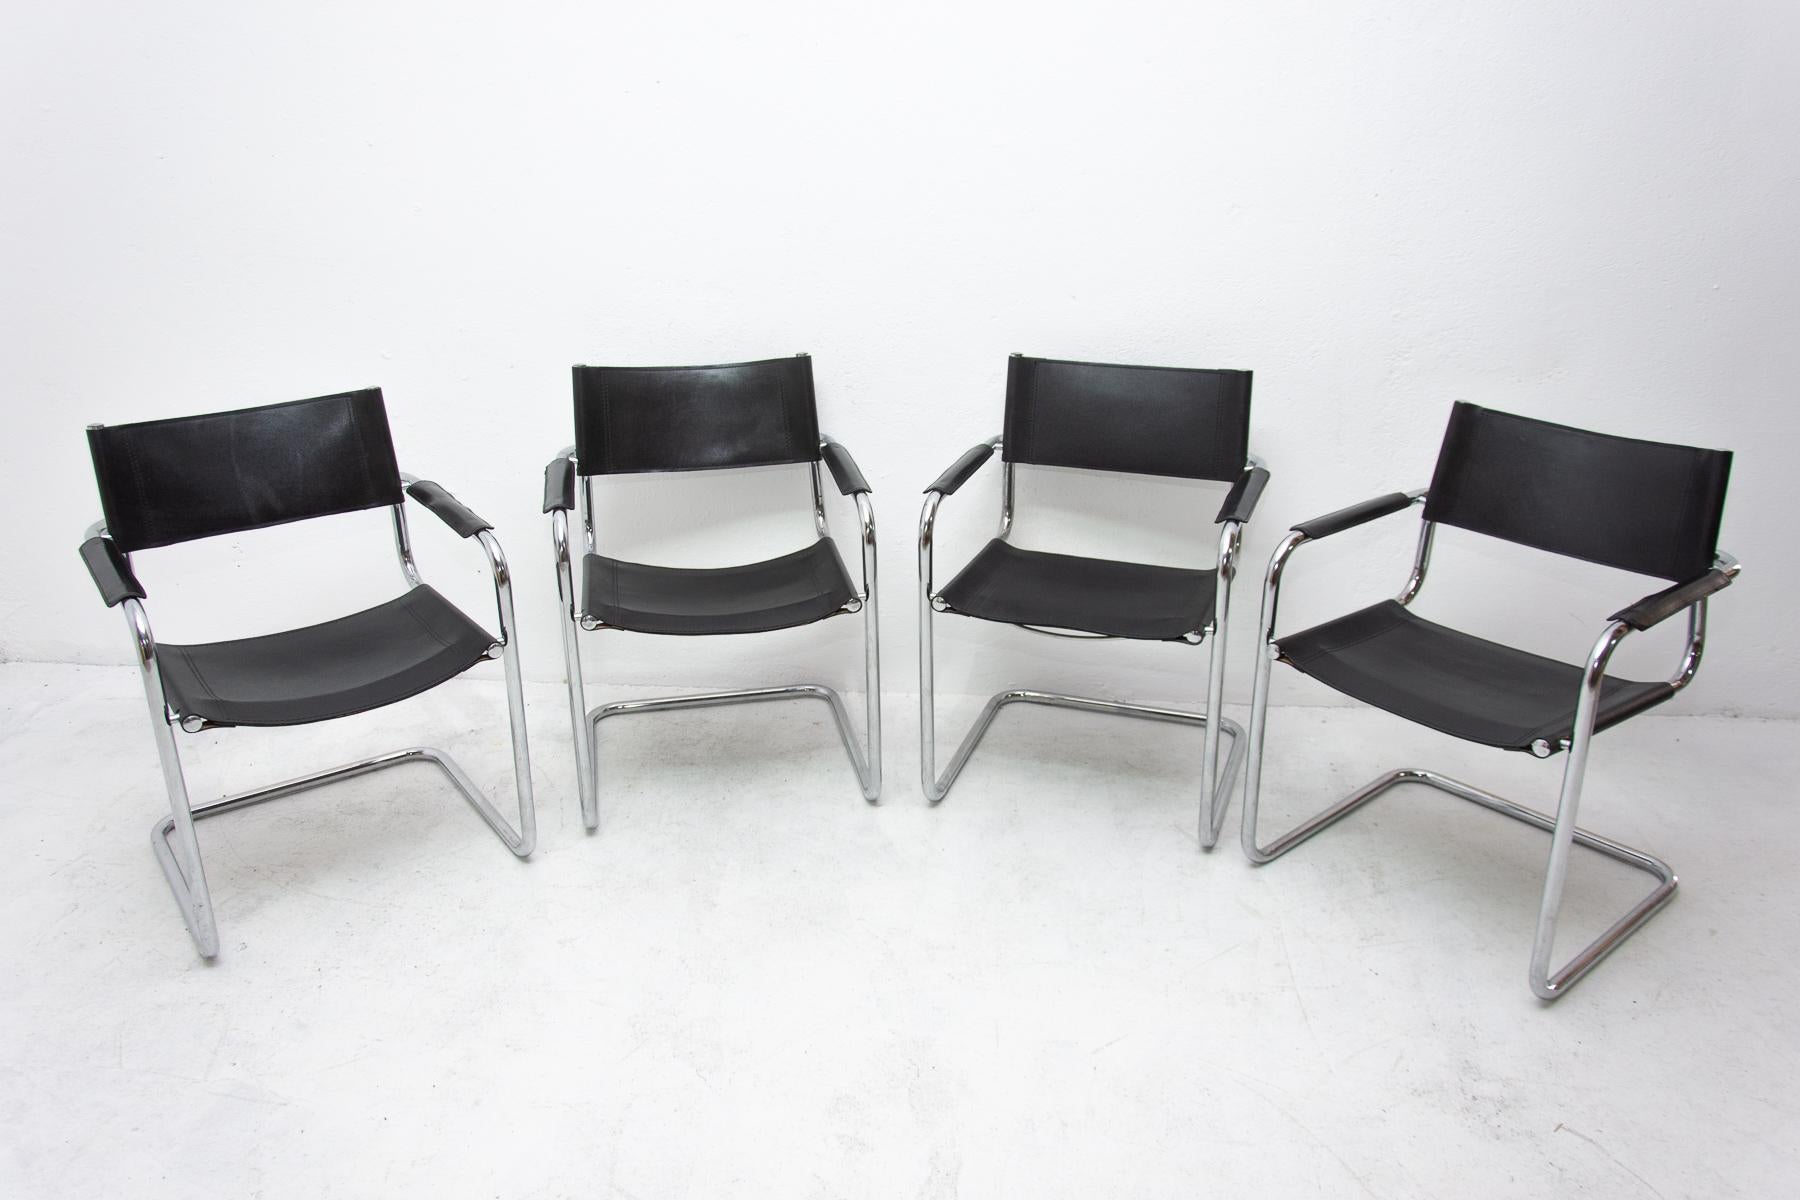 This set of model S34 chairs was designed by Mart Stam and produced in Italy in the 1980s. The chairs feature frames in chrome-plated tubular steel and black leather seats, armrests and backrests.
The chairs are in very good condition without